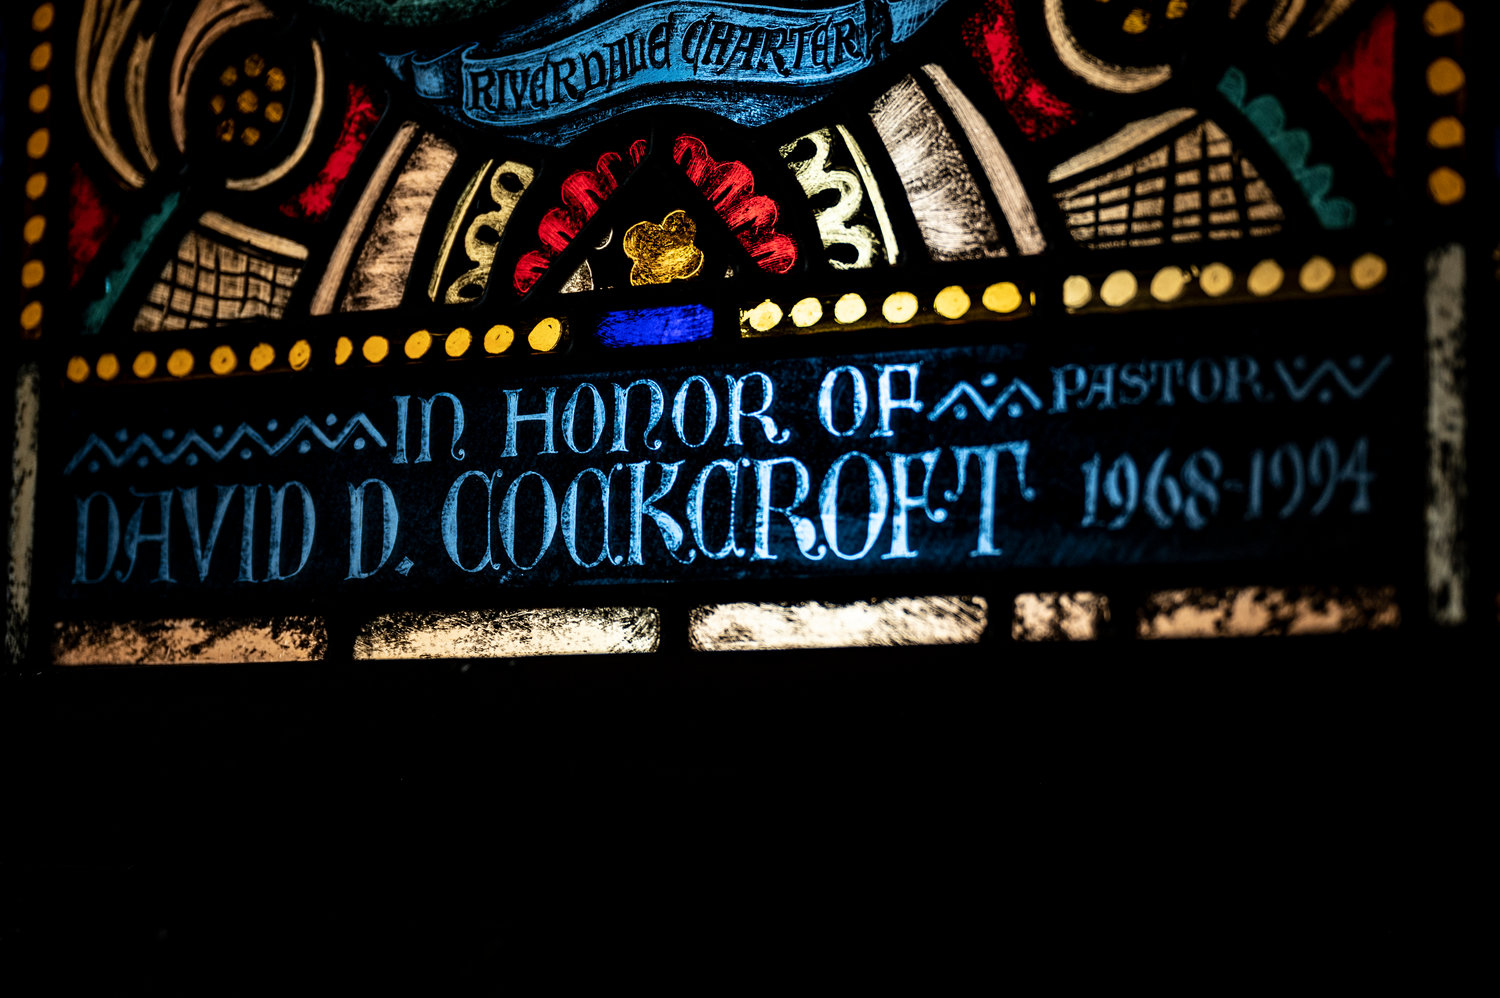 There are many stories told in stained-glass windows found in churches. But this particular one at Riverdale Presbyterian Church shares the event-filled ministry of the Rev. David Cockcroft, who served the spiritual needs of the congregation between 1968 and 1994. Cockcroft died June 3 at 89.